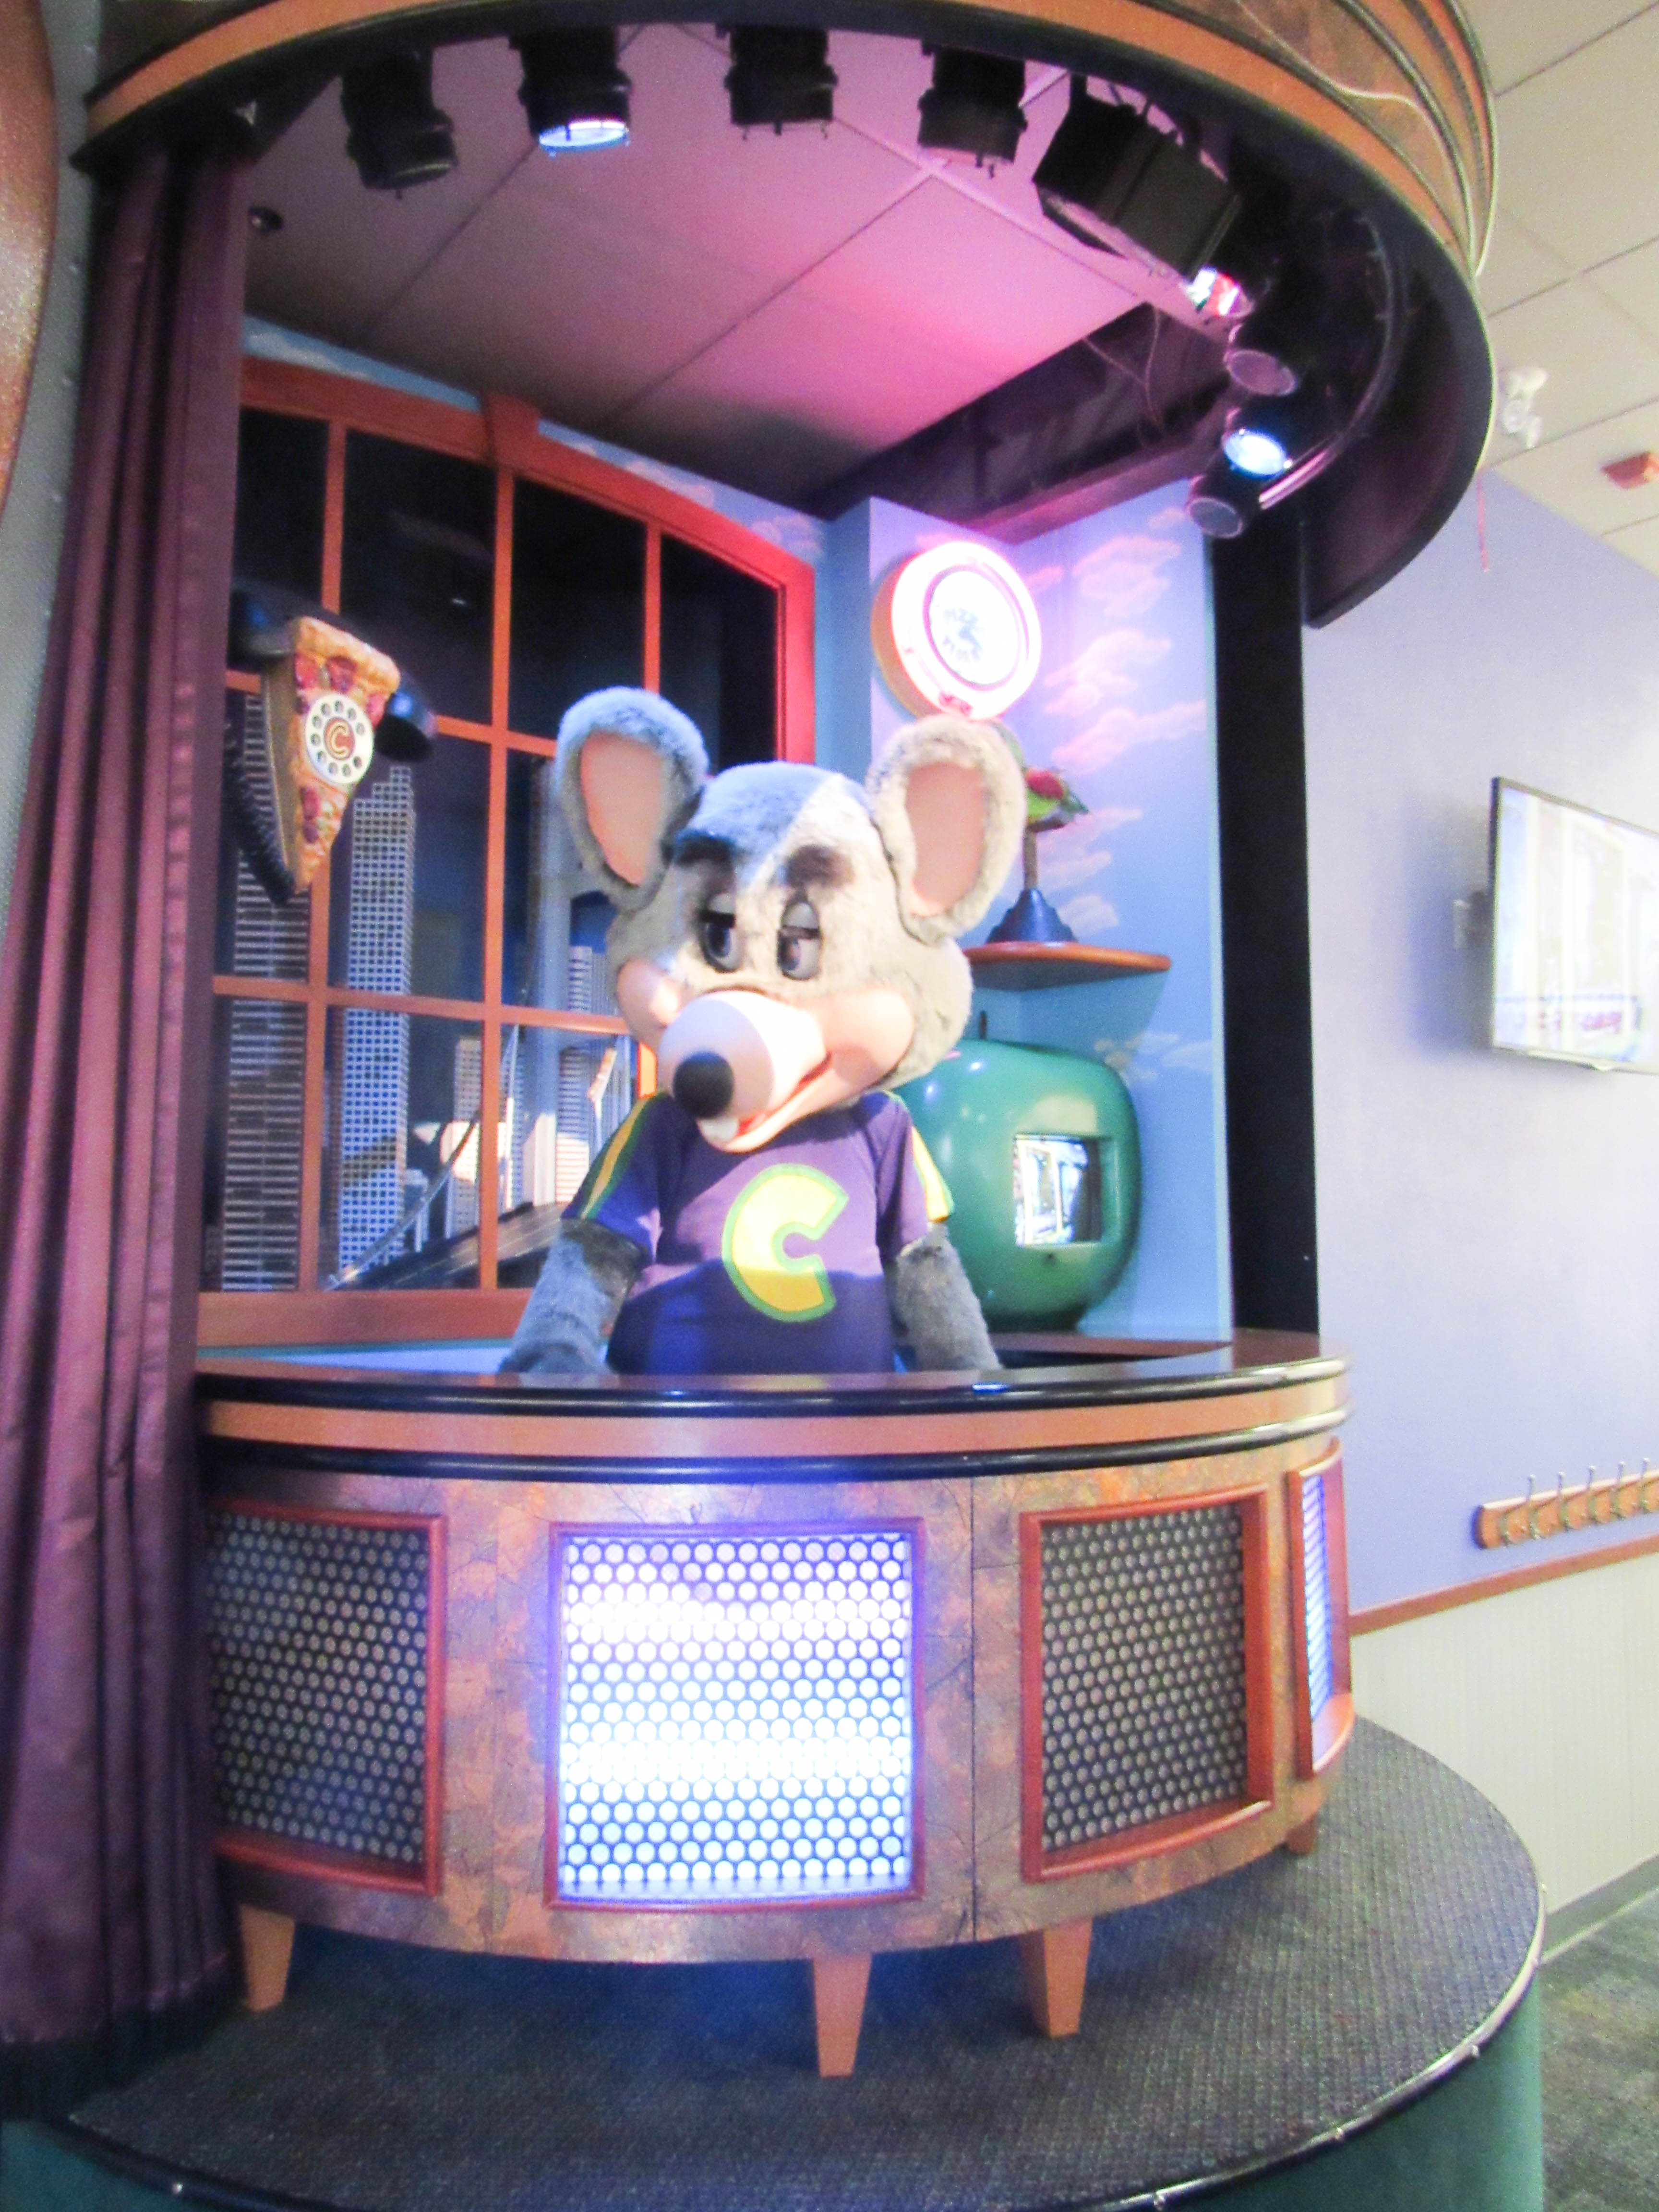 Chuck e cheese birthday party on livin' life with style 